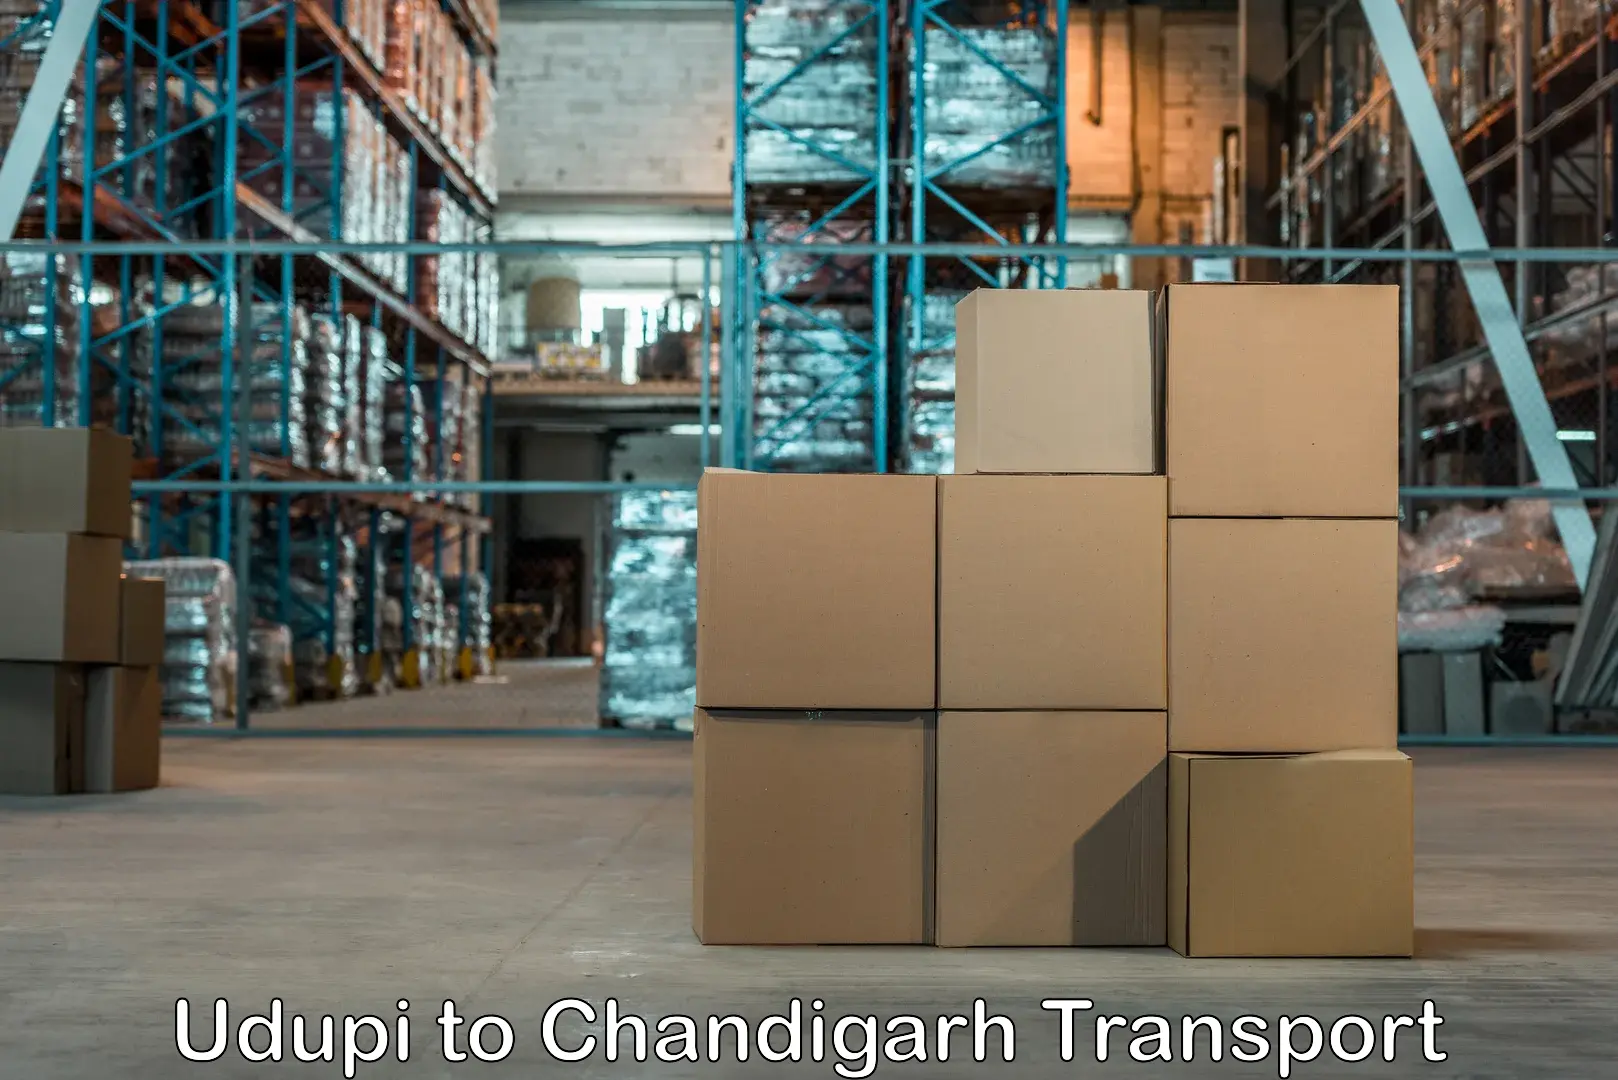 Container transport service Udupi to Chandigarh